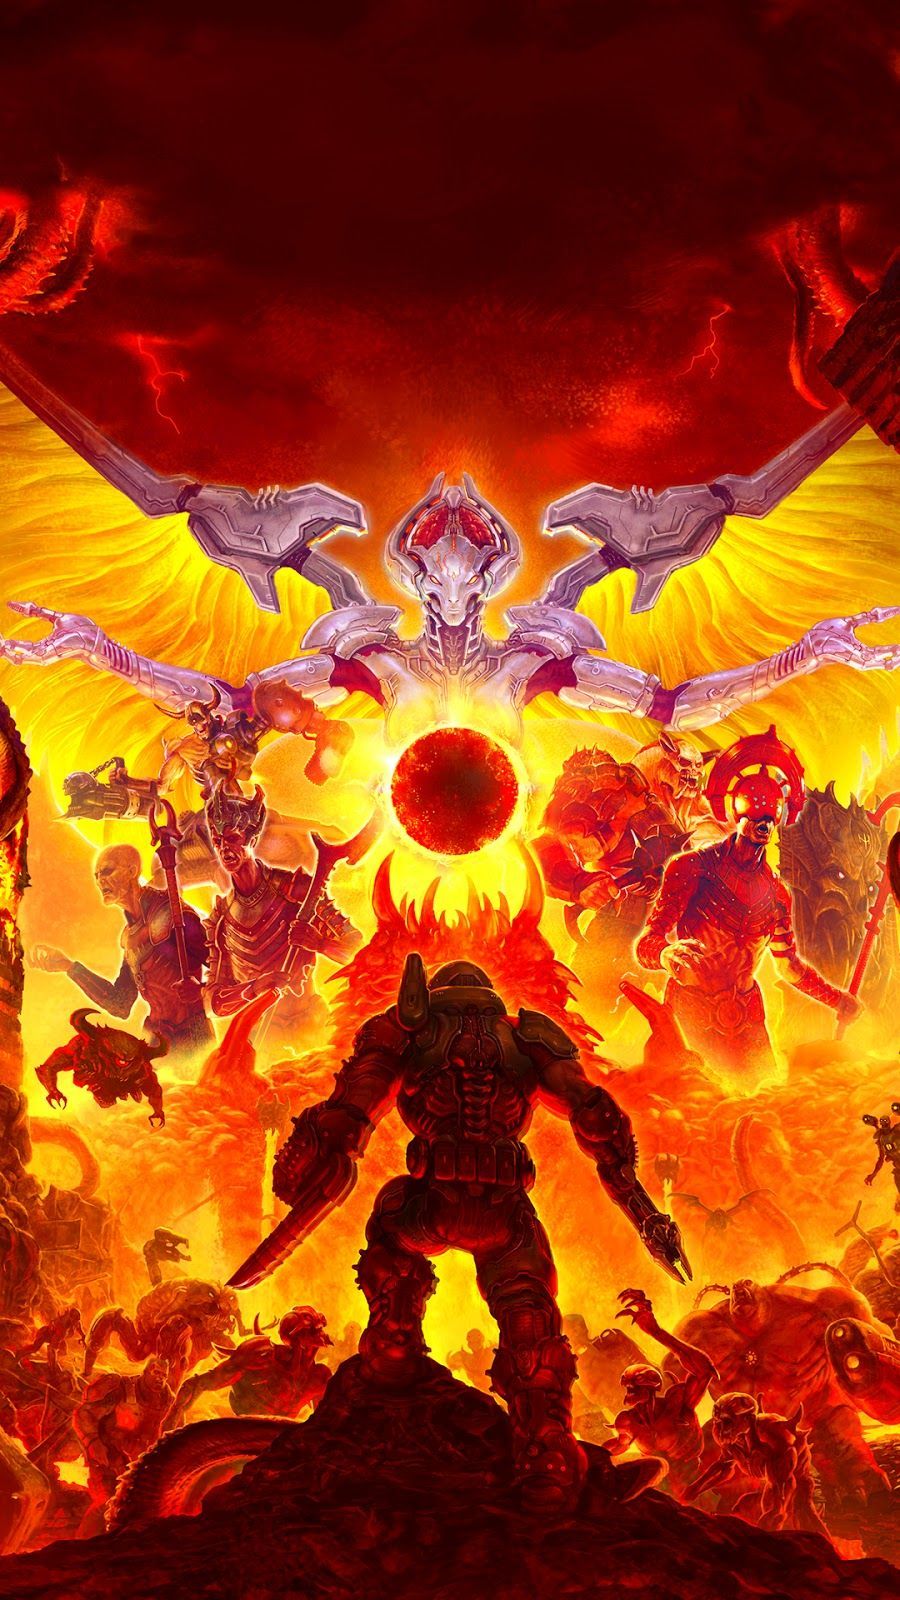 Download DOOM Eternal mobile Wallpaper for your Android, iPhone